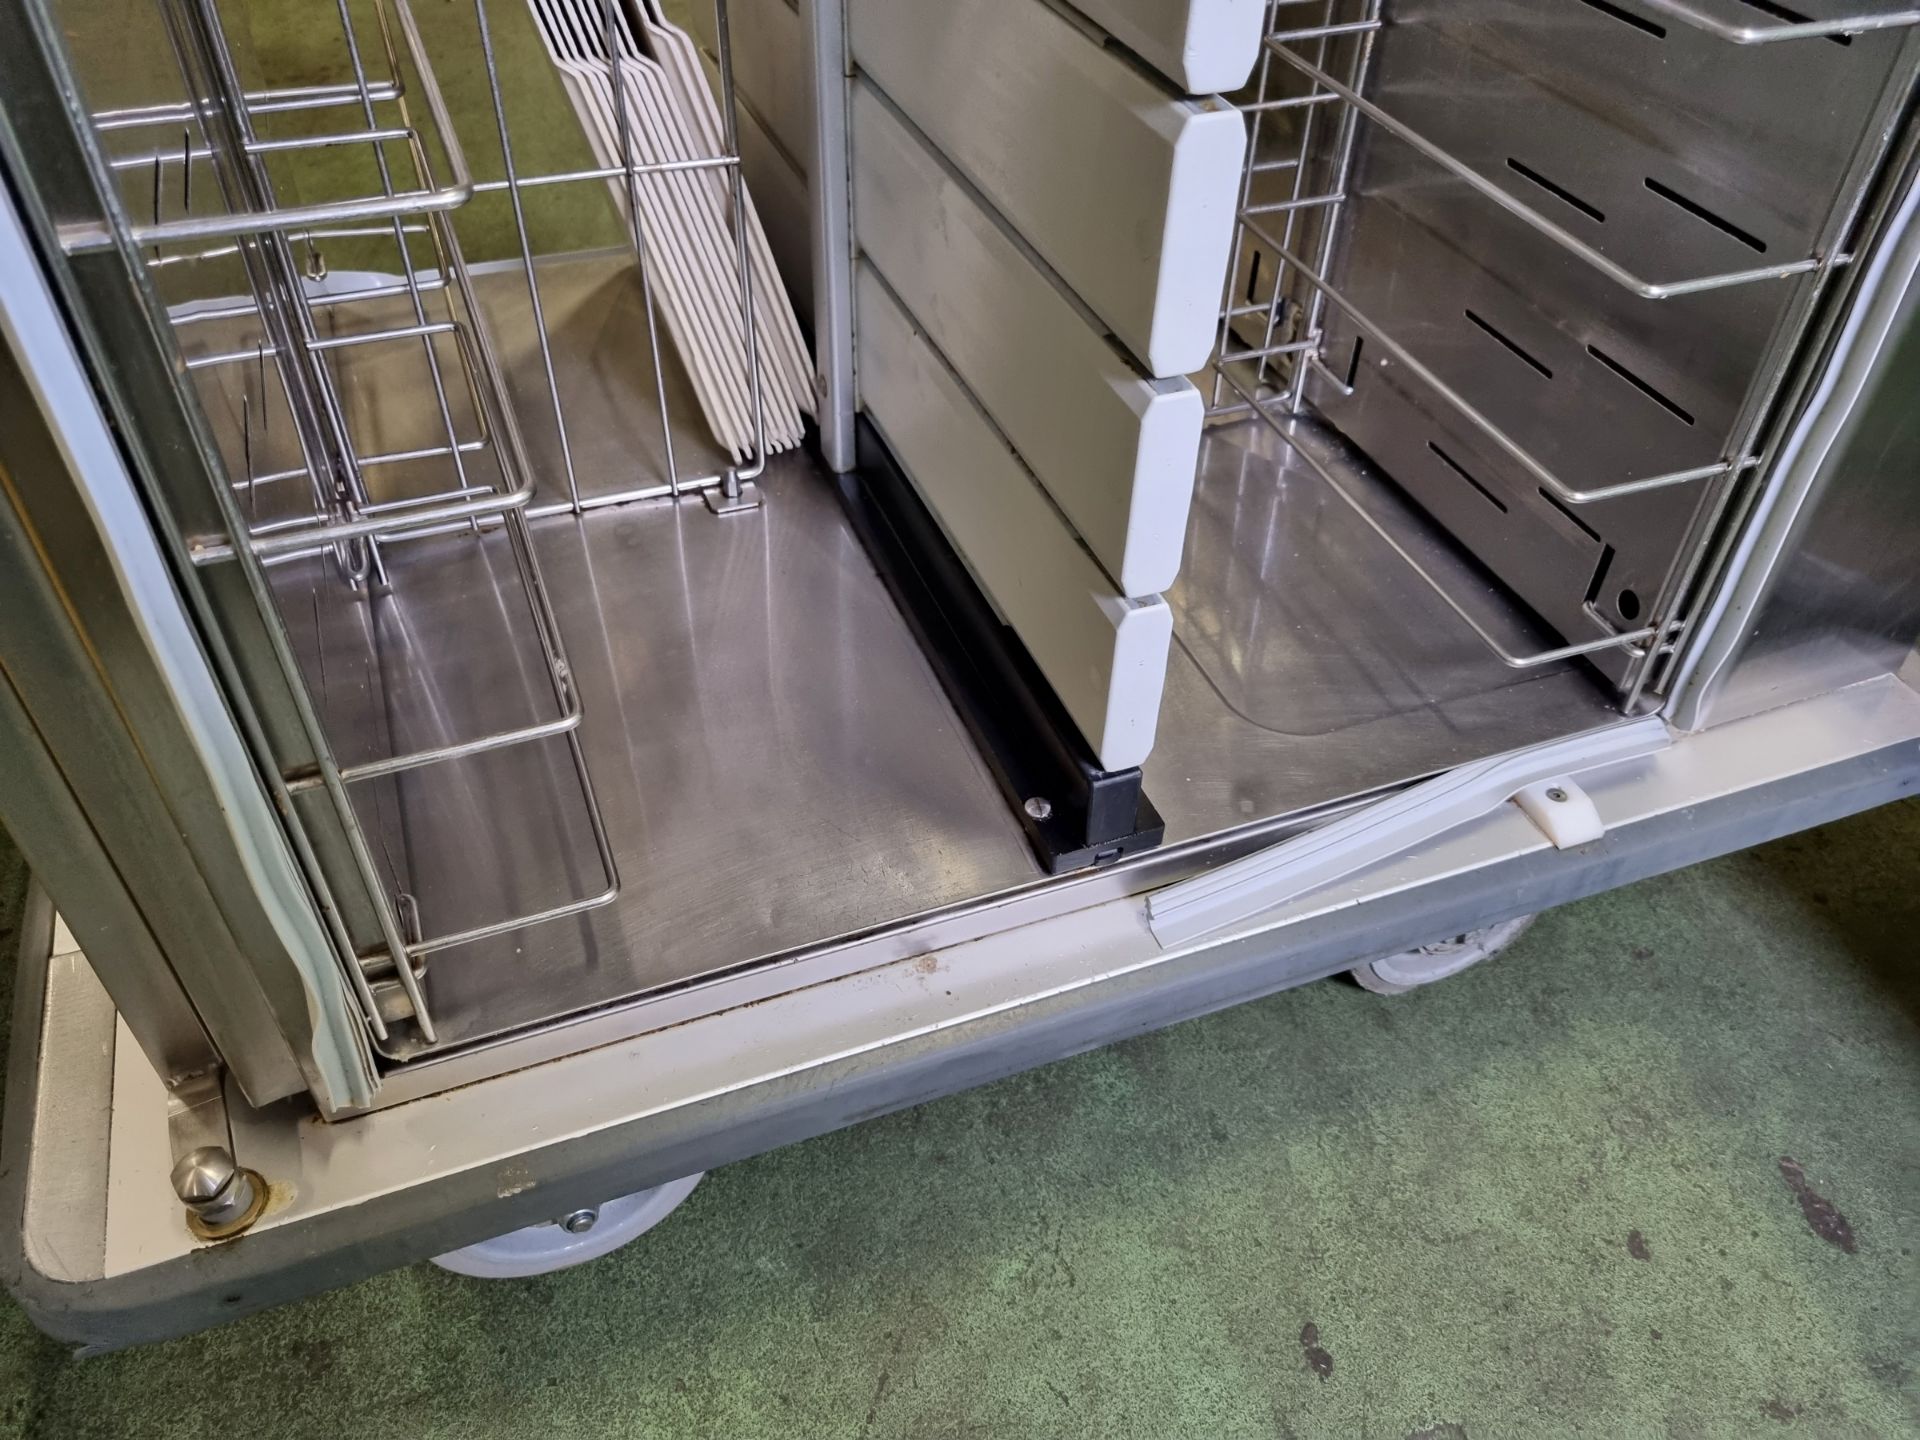 Burlodge RTS hot and cold tray delivery trolley - opens boths sides - W 800 x D 1100 x H 1500mm - Image 4 of 6